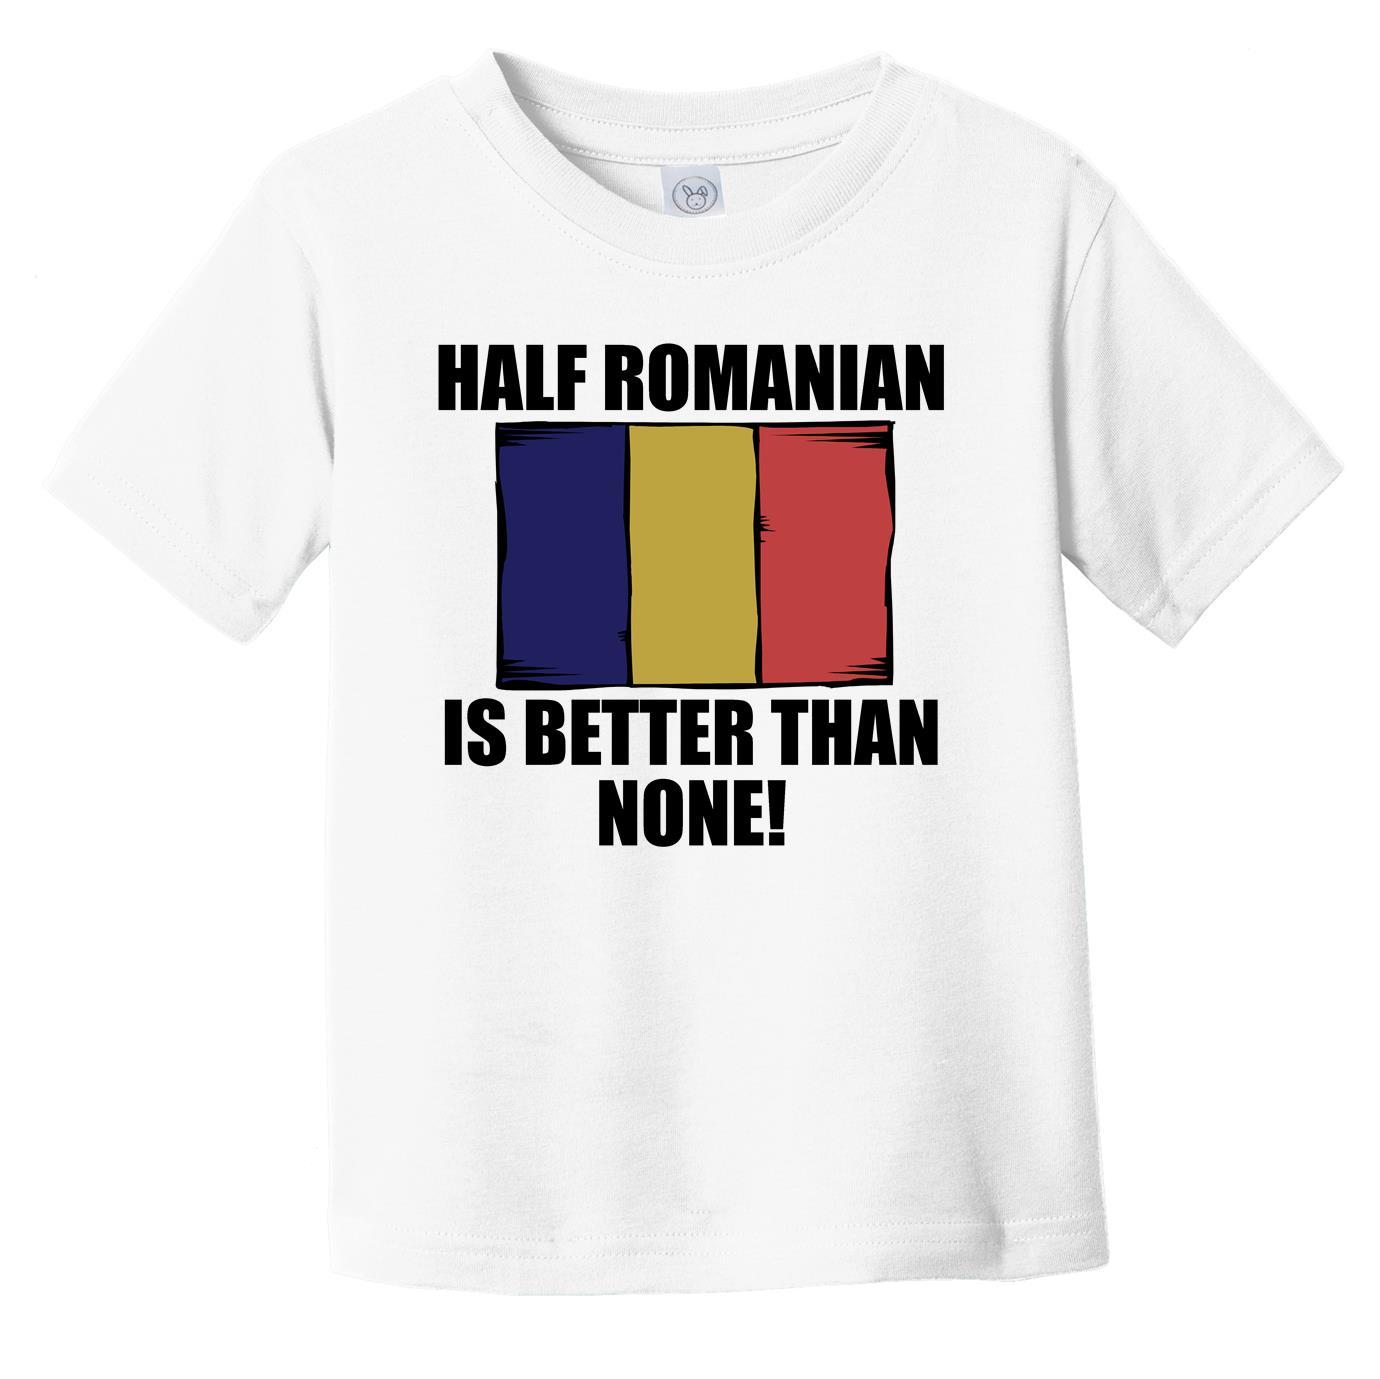 Half Romanian Is Better Than None Infant Toddler T-Shirt